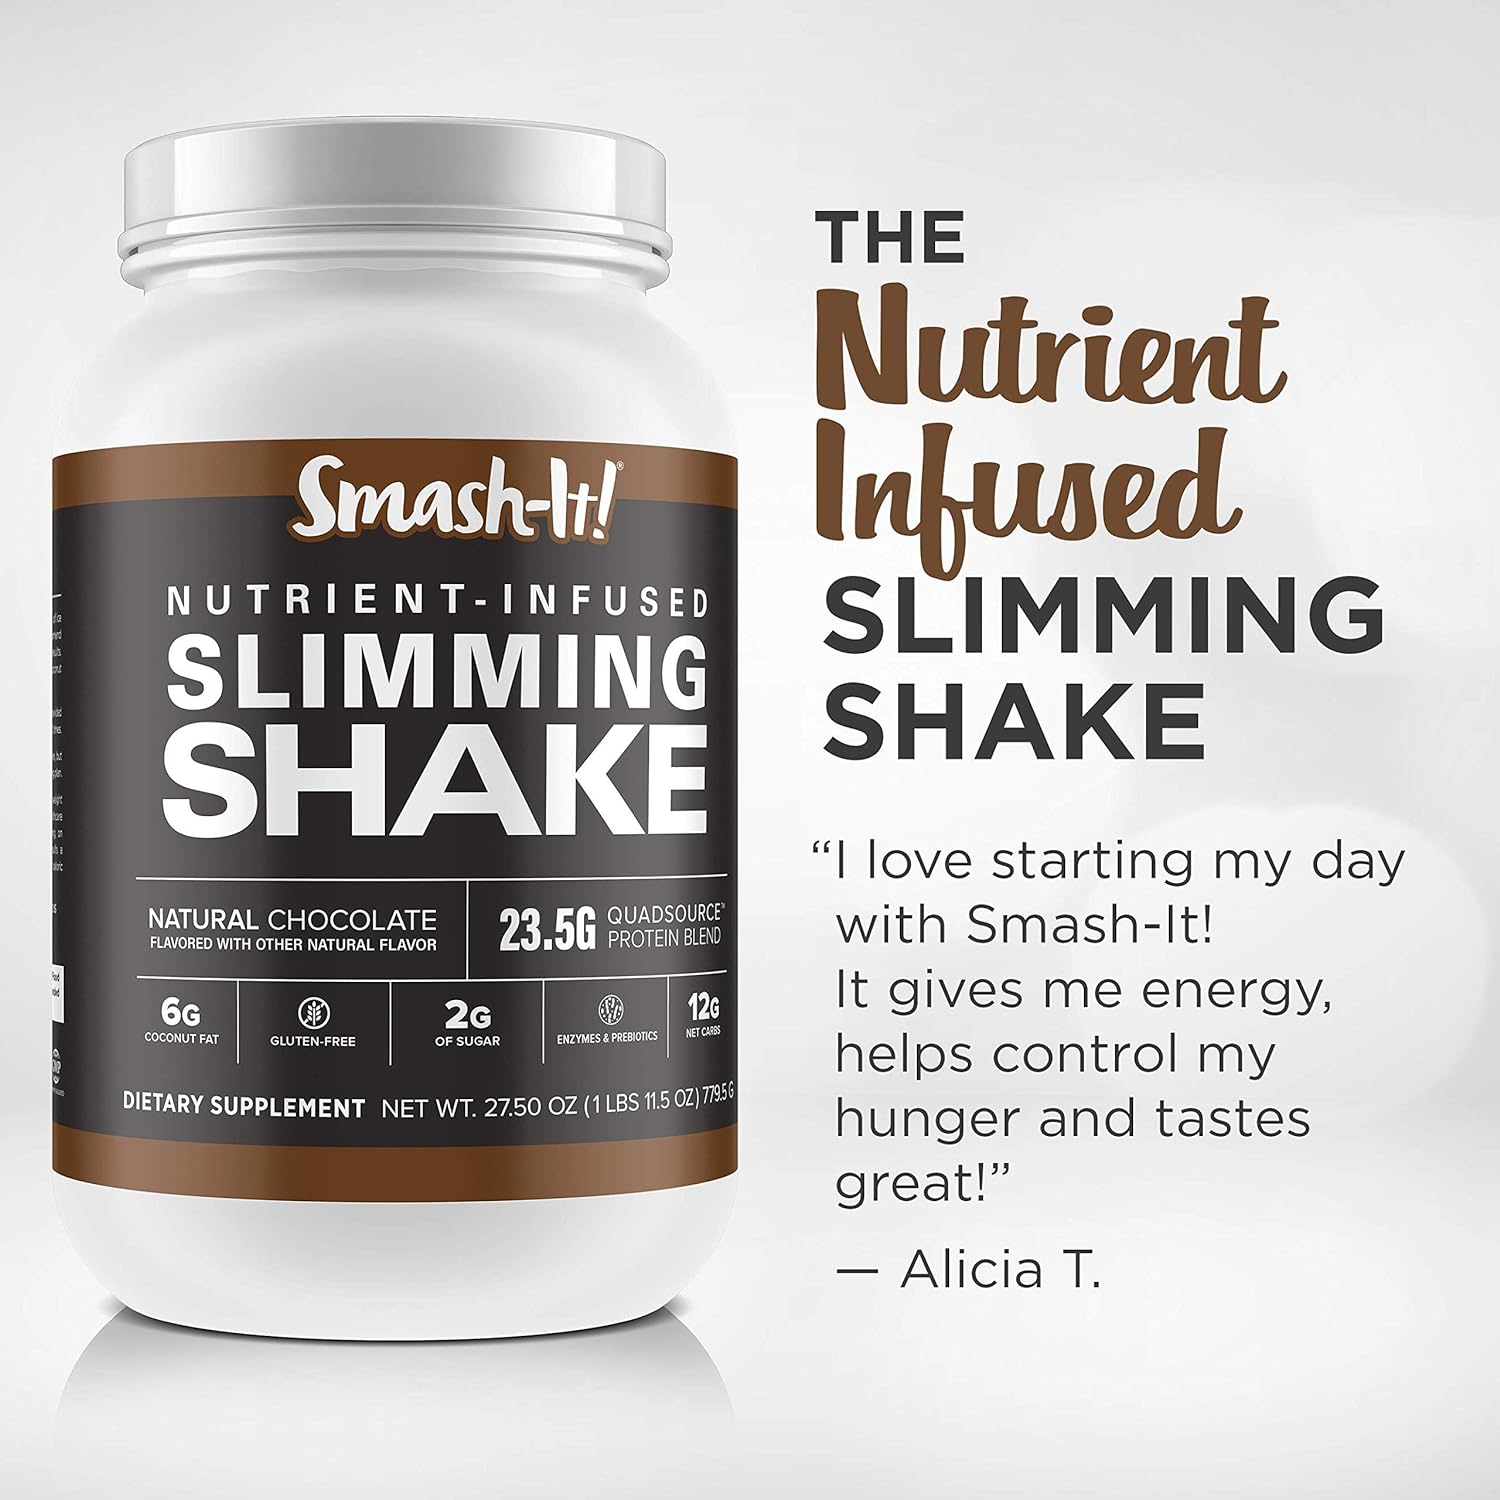 Primal Labs Smash-It Nutrient Infused Low Carb Protein Powder to Help 